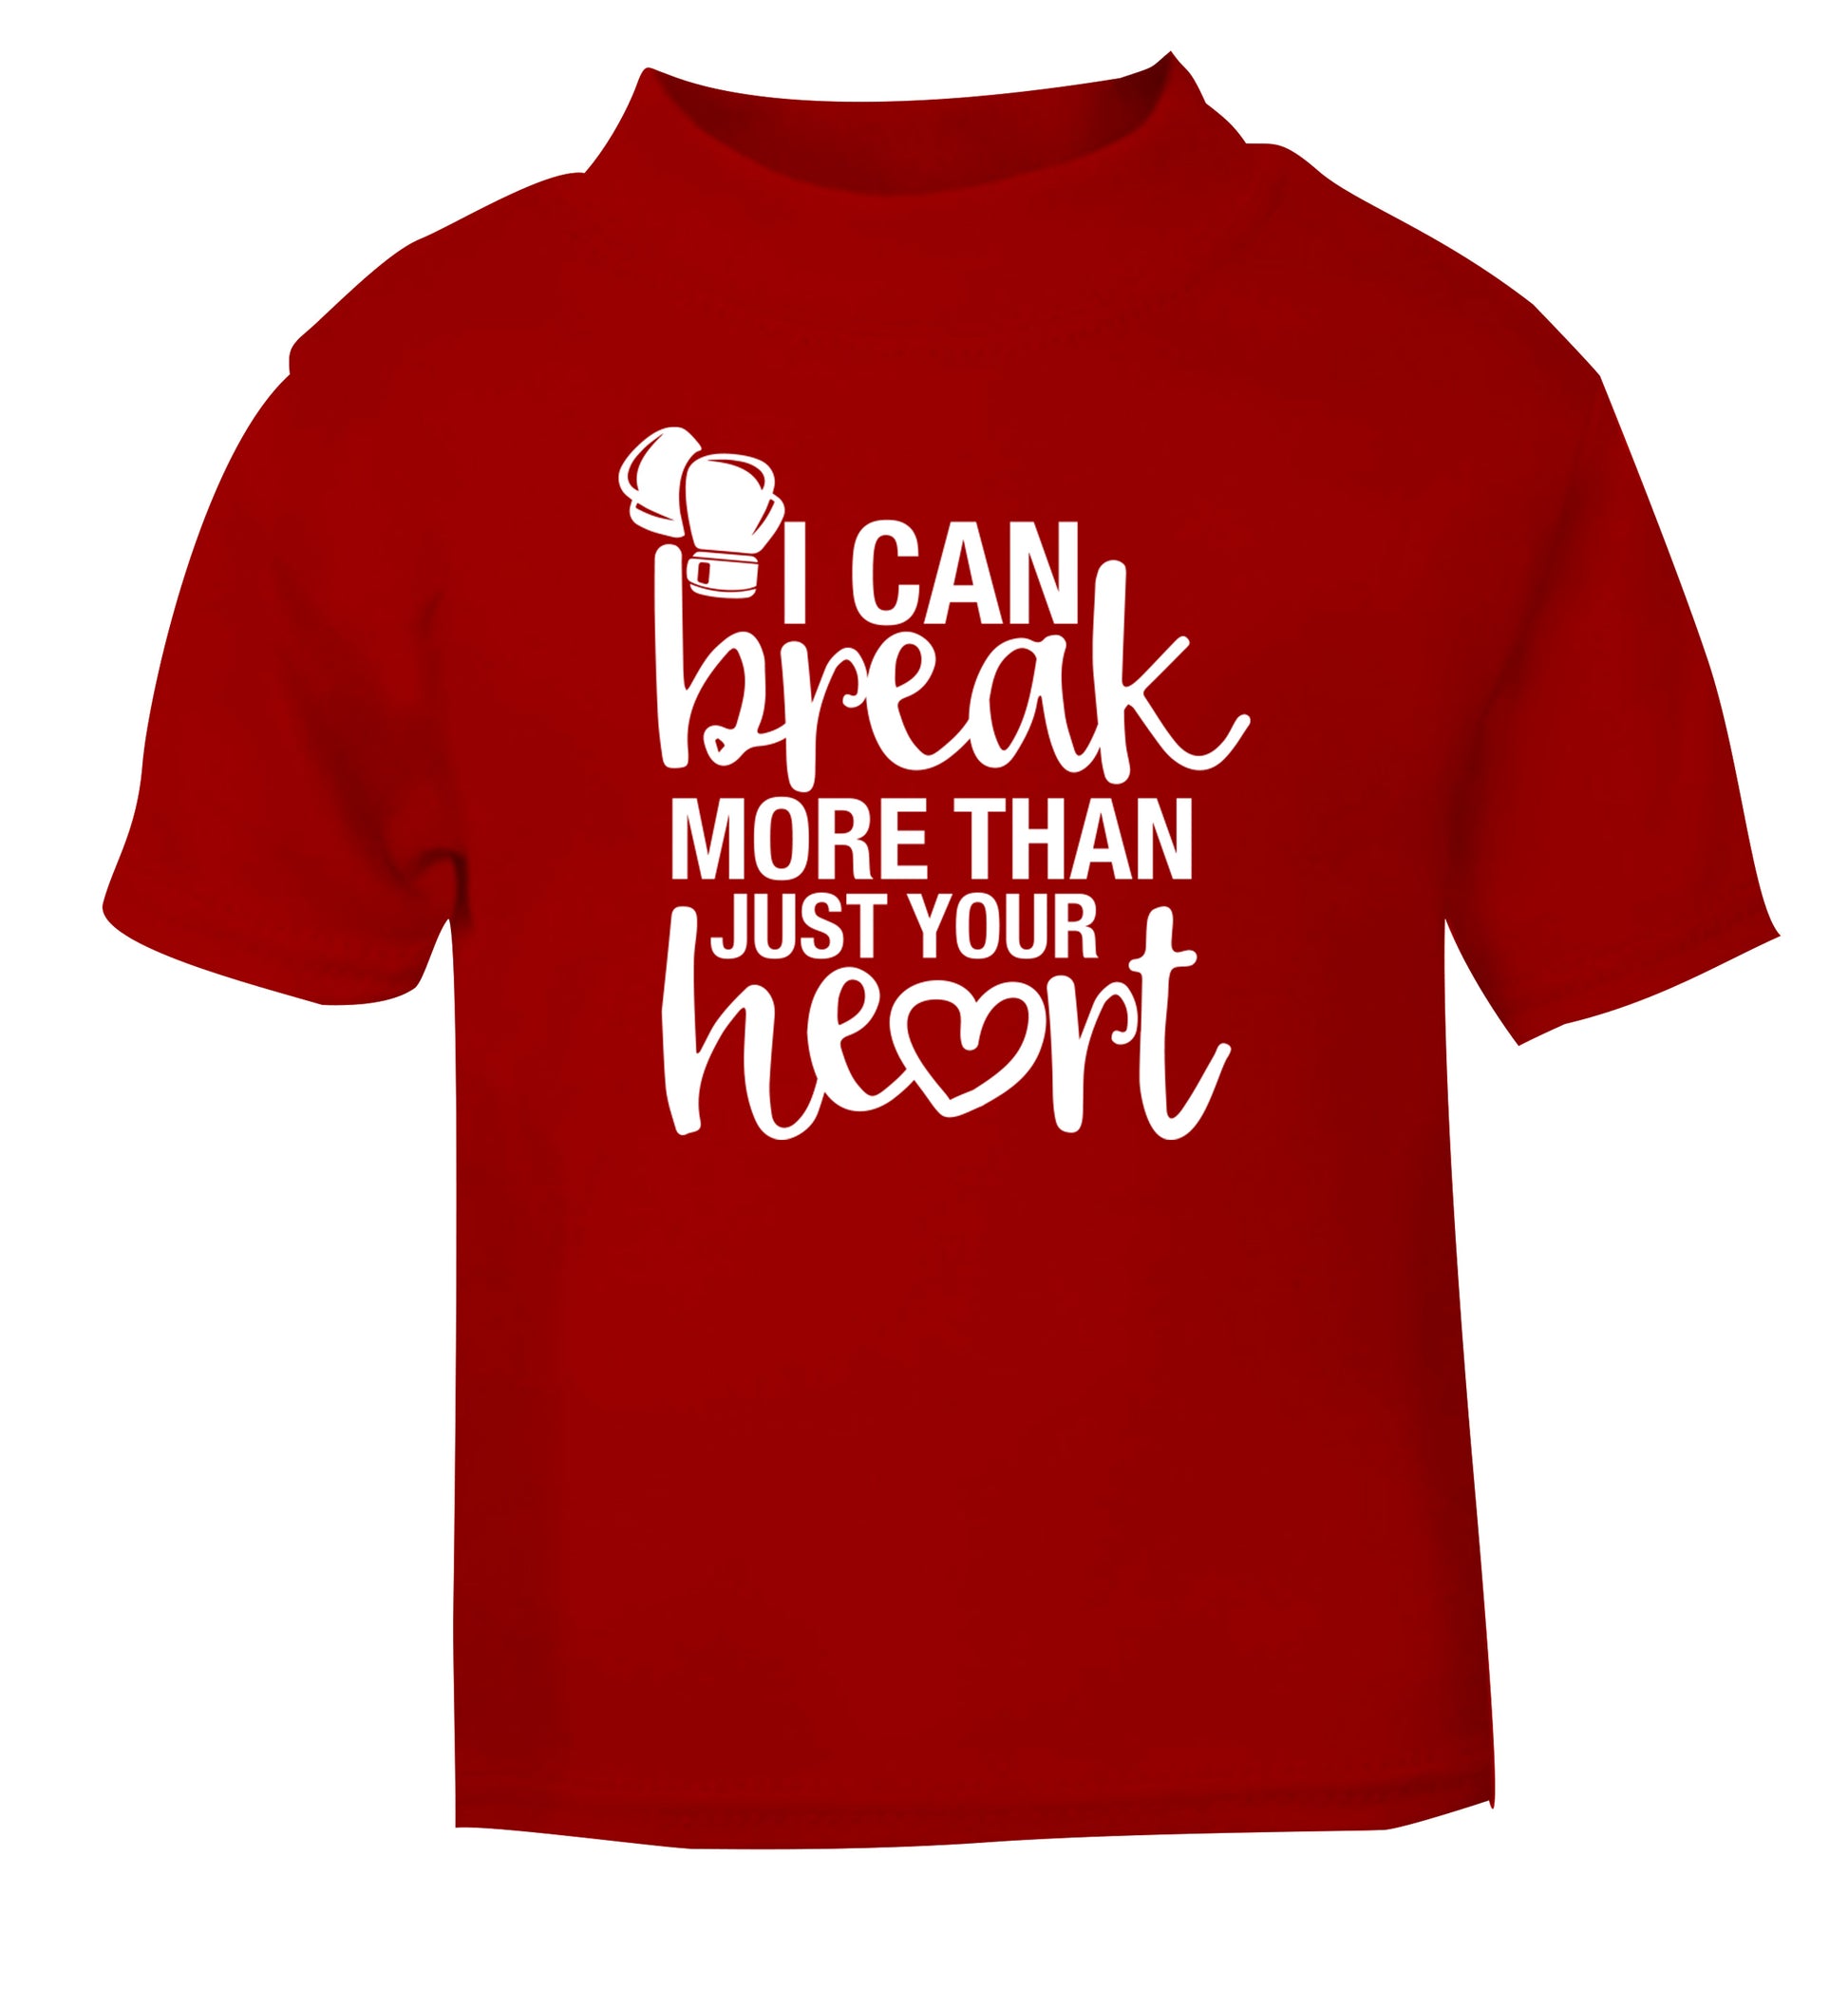 I can break more than just your heart red Baby Toddler Tshirt 2 Years